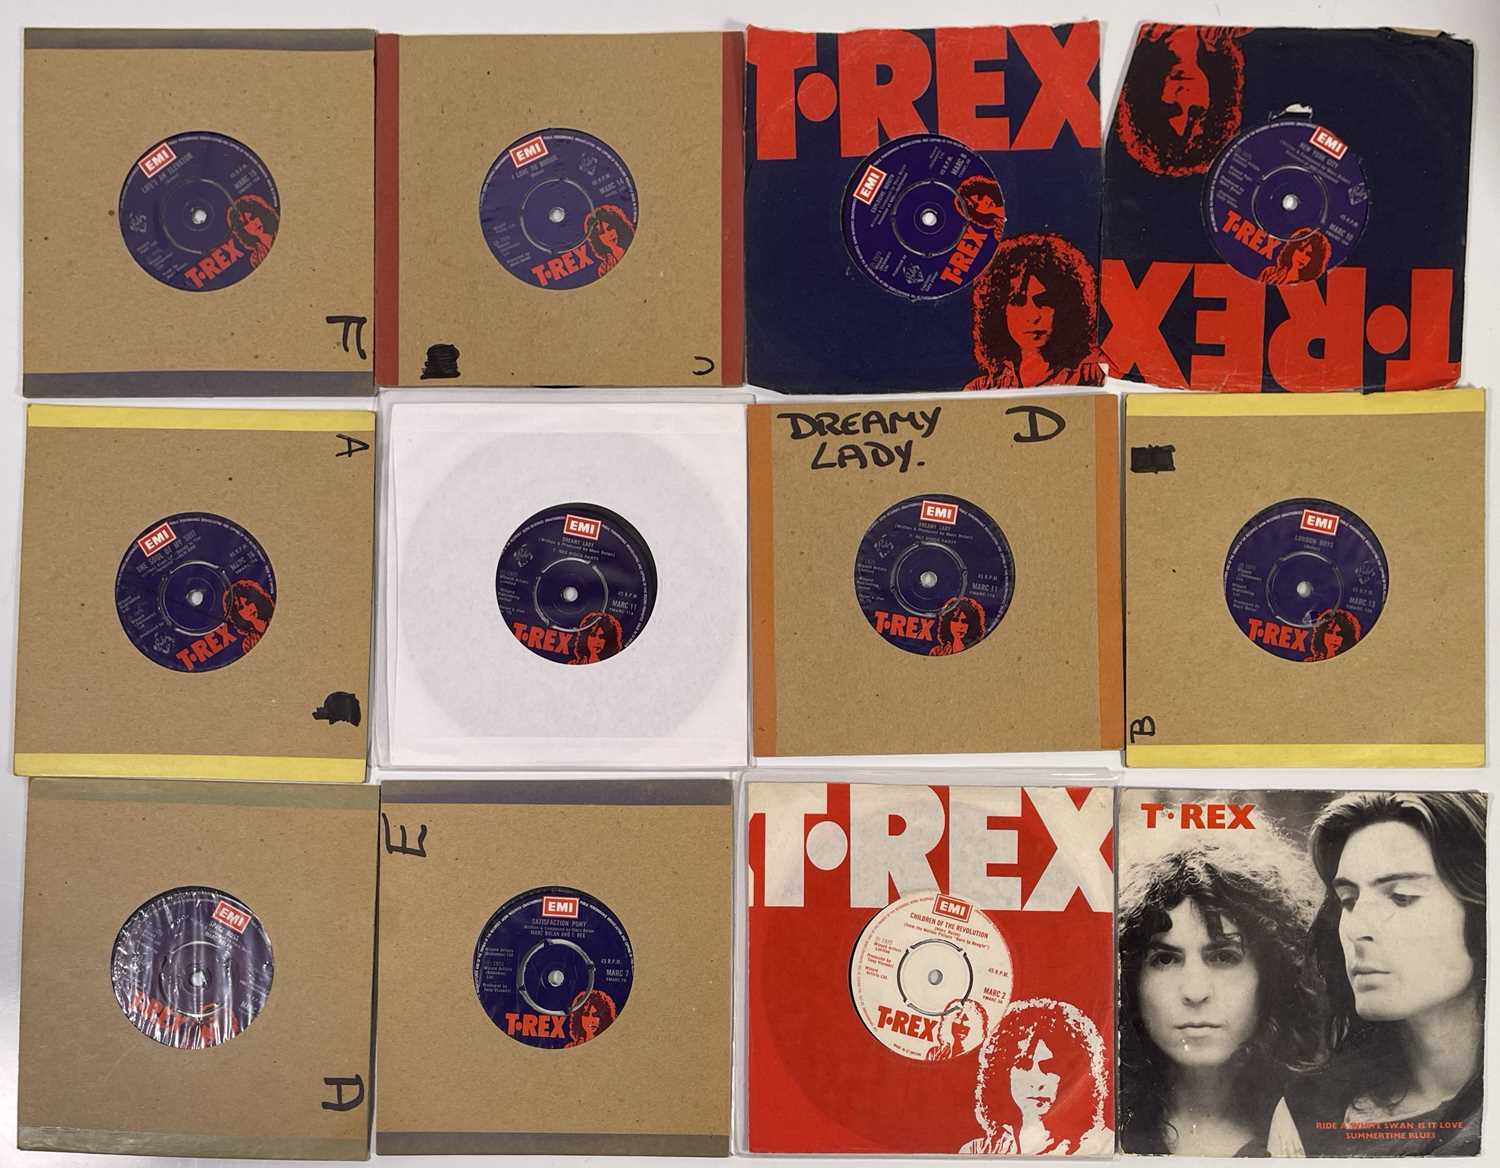 Lot 440 - DANNY'S SINGLES - GLAM ROCK COLLECTION.